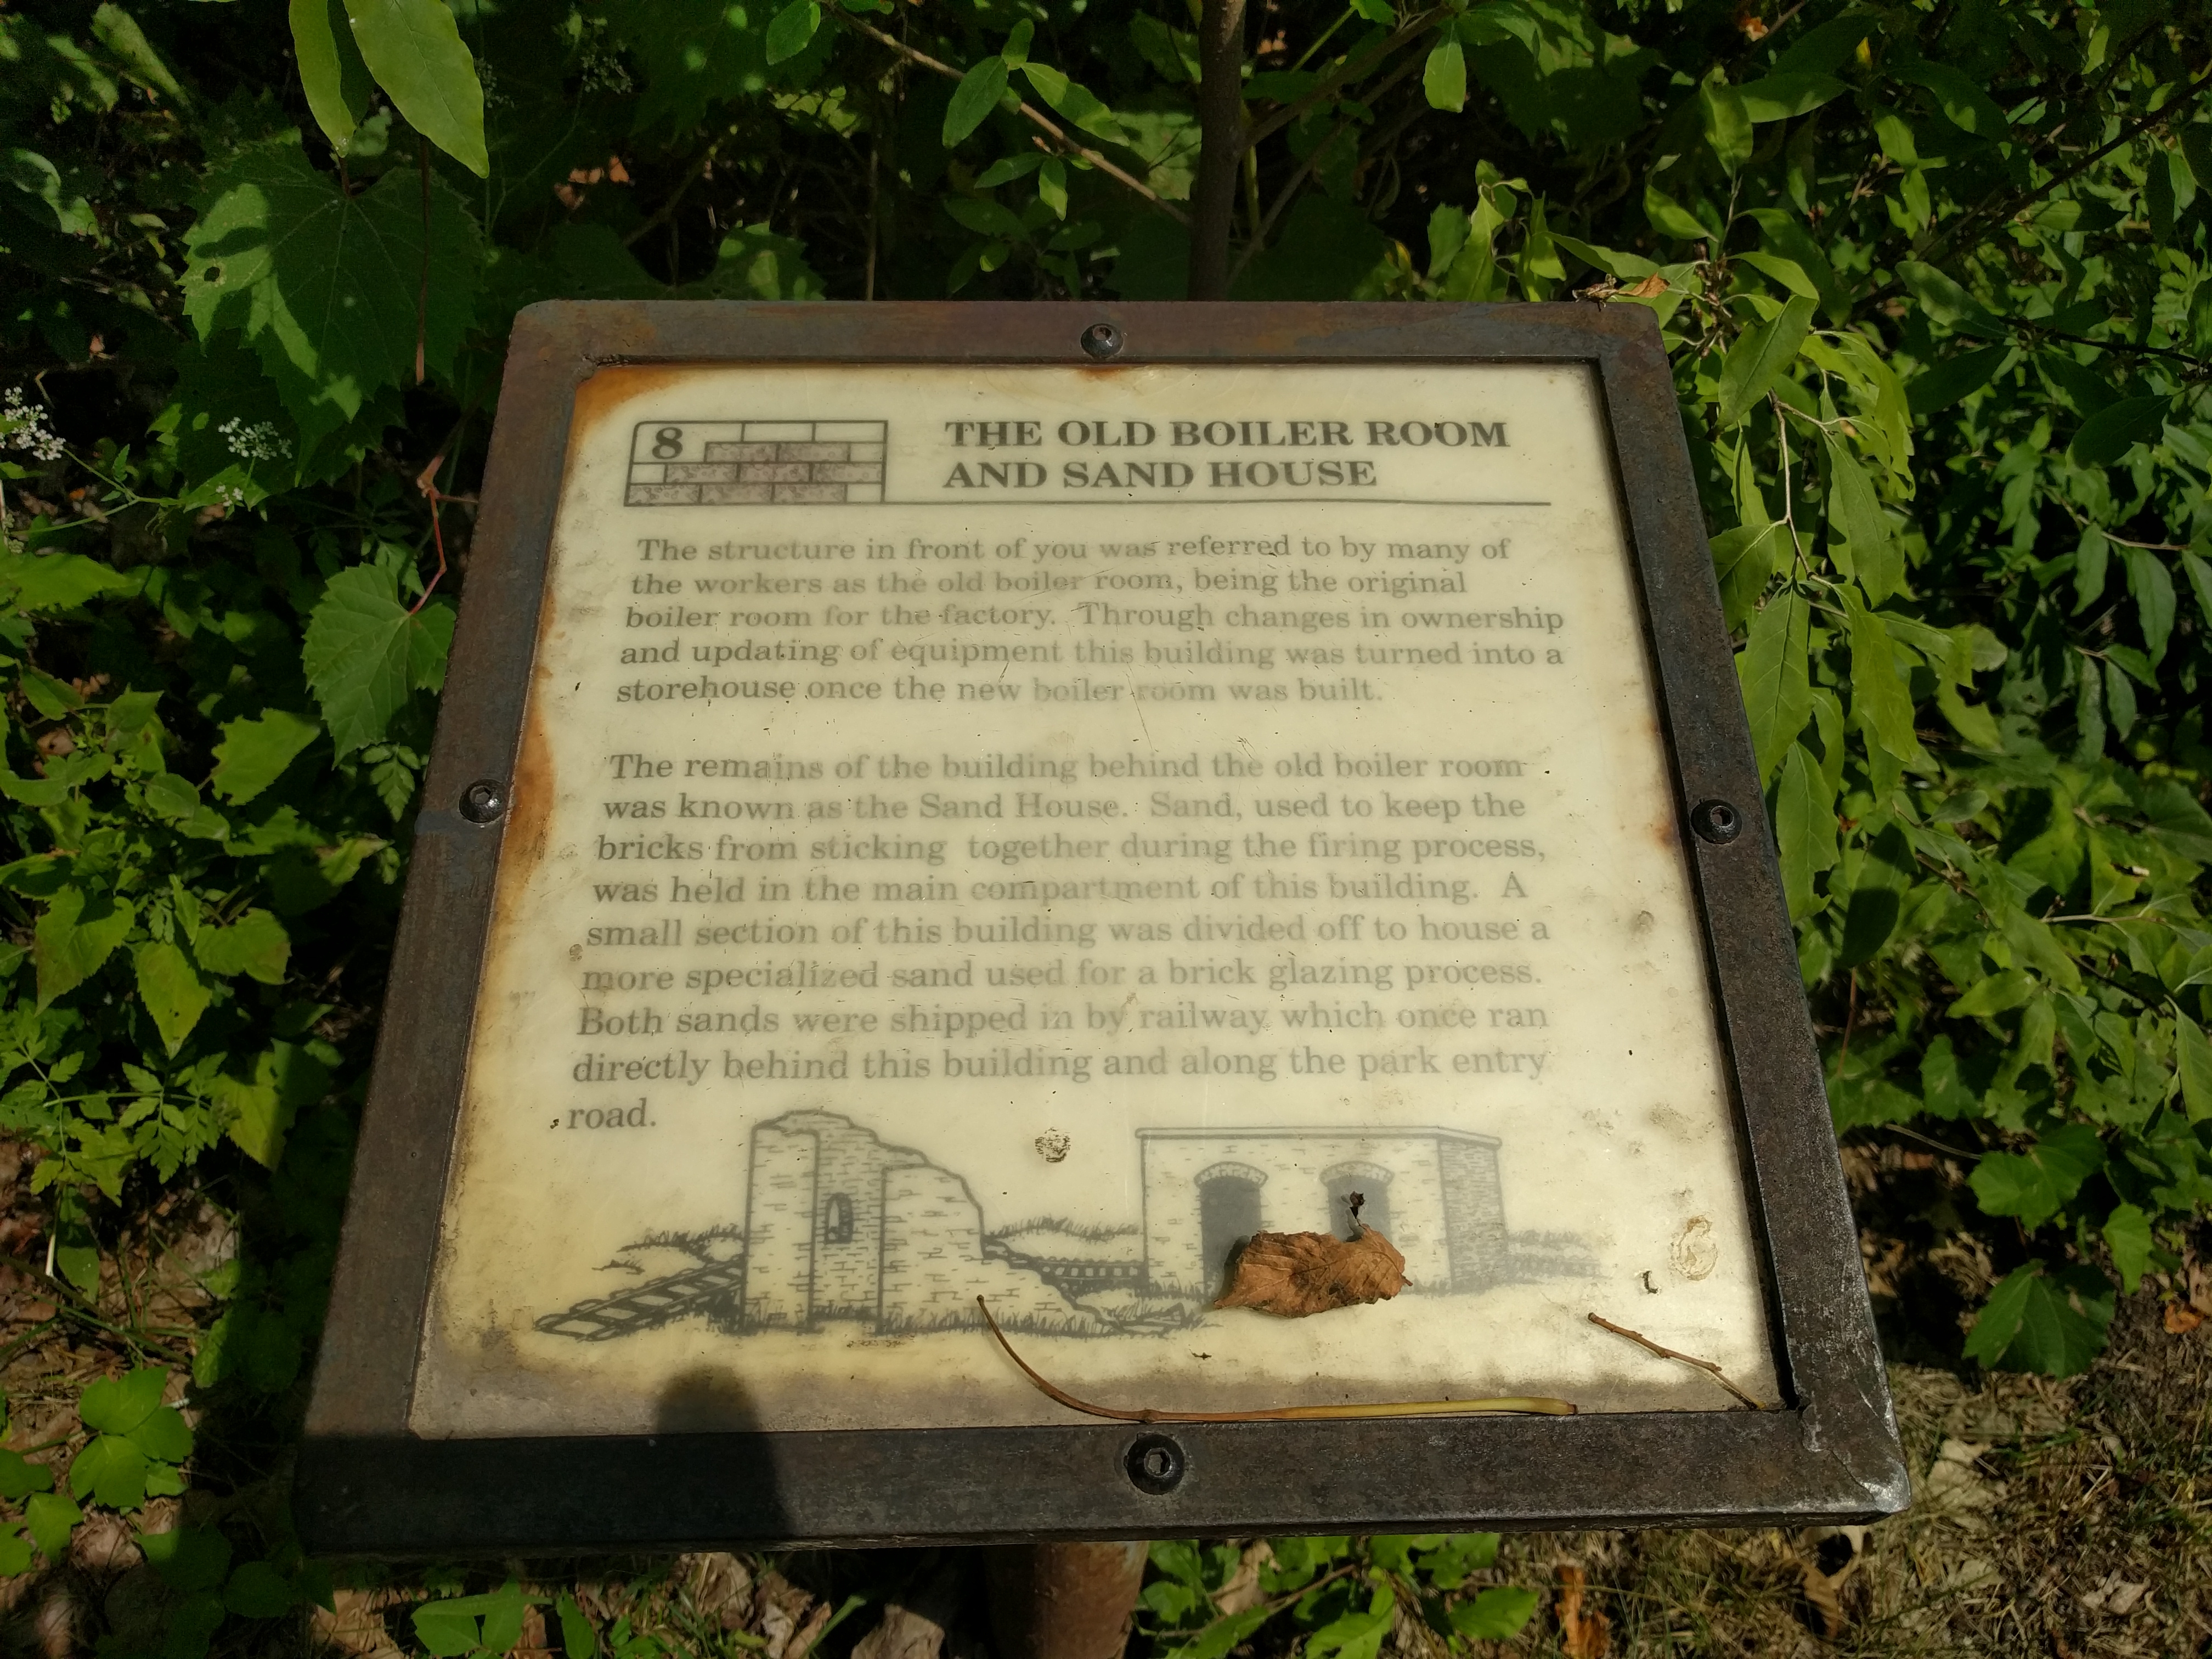 The Old Boiler Room and Sand House Marker